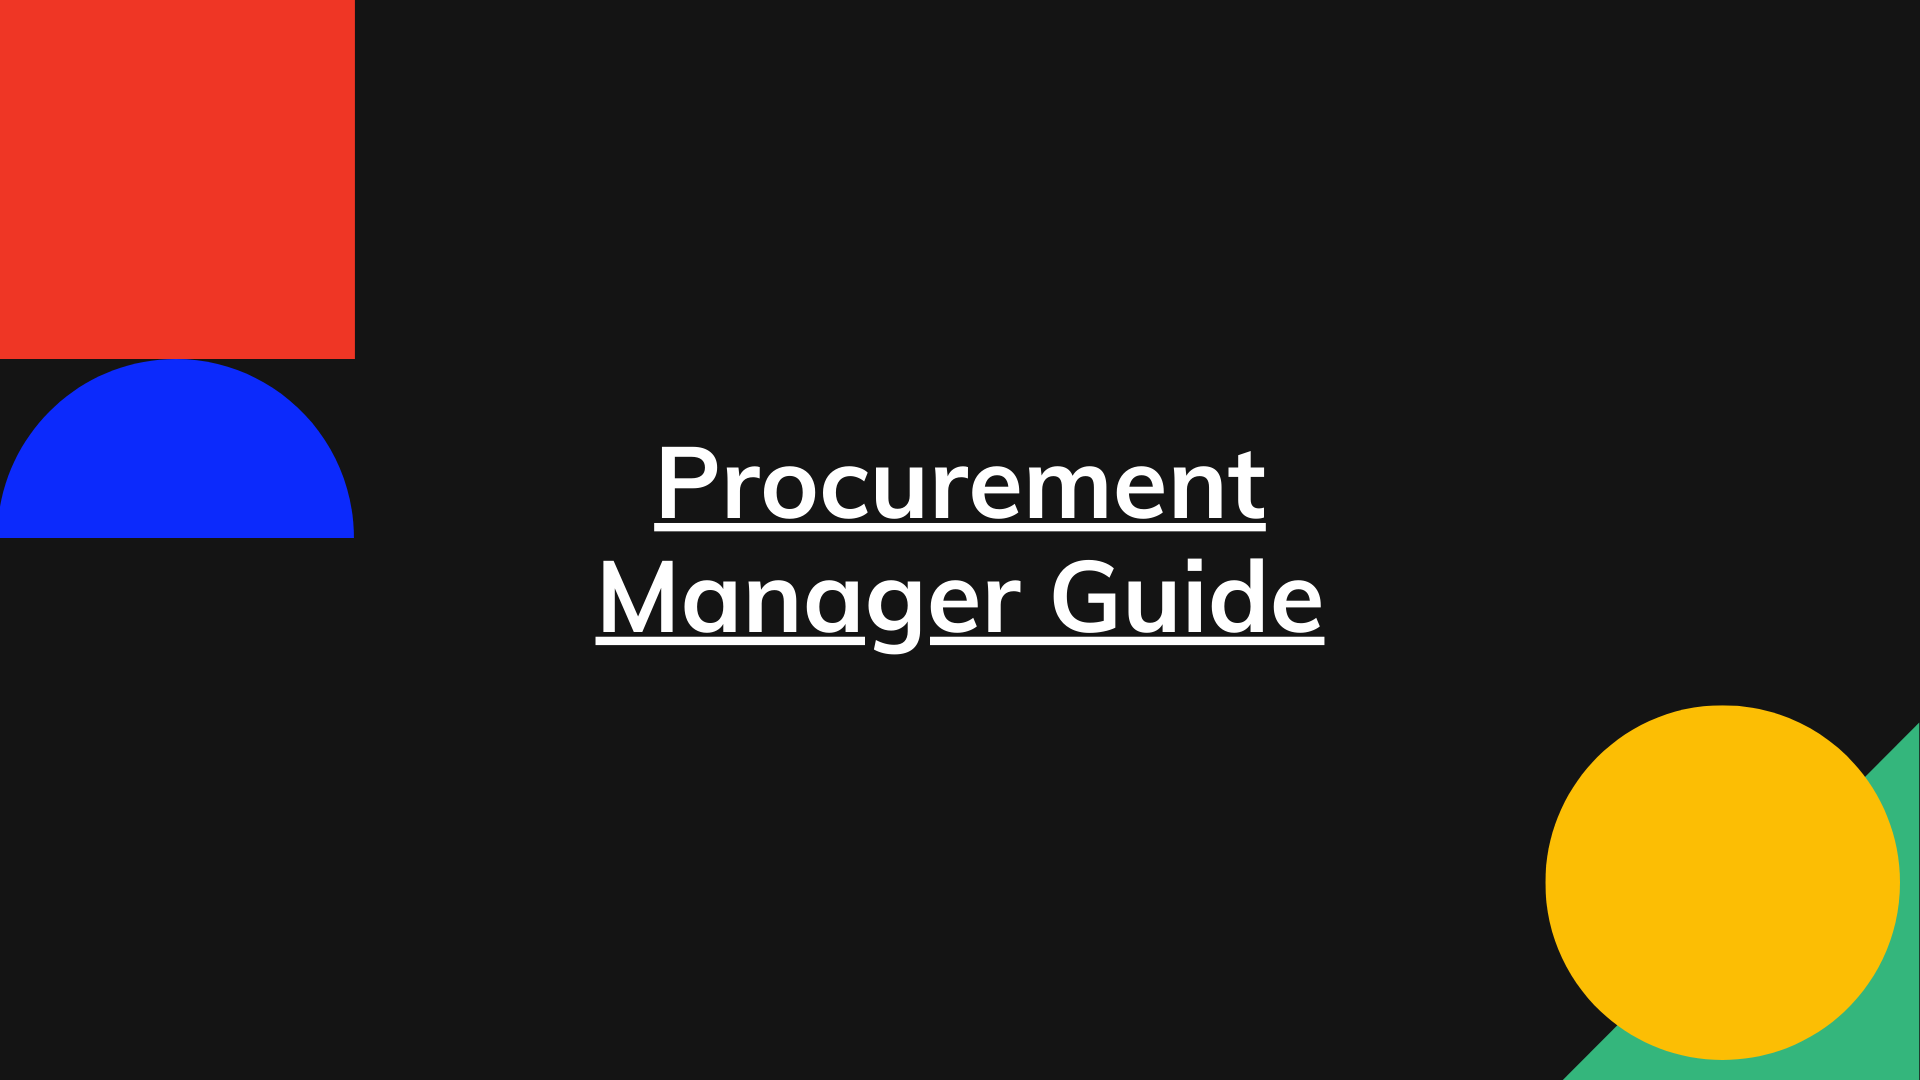 The Procurement Manager Guide